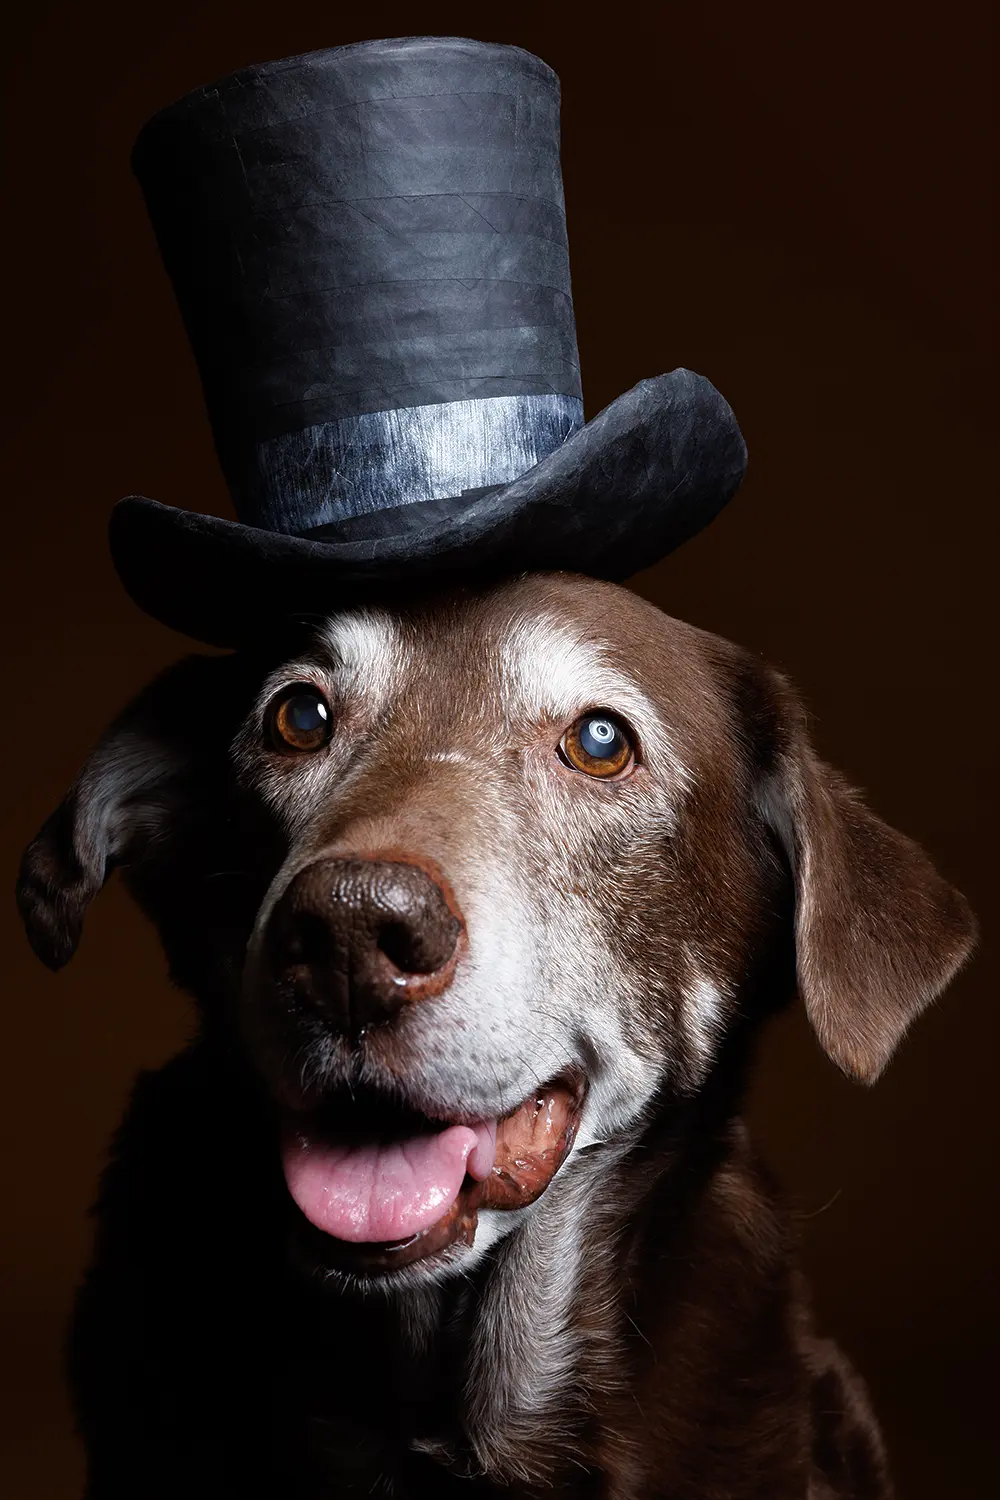 Portrait of a chocolate lab wearing a black top hat made from upcycled paper against a rich dark brown background.